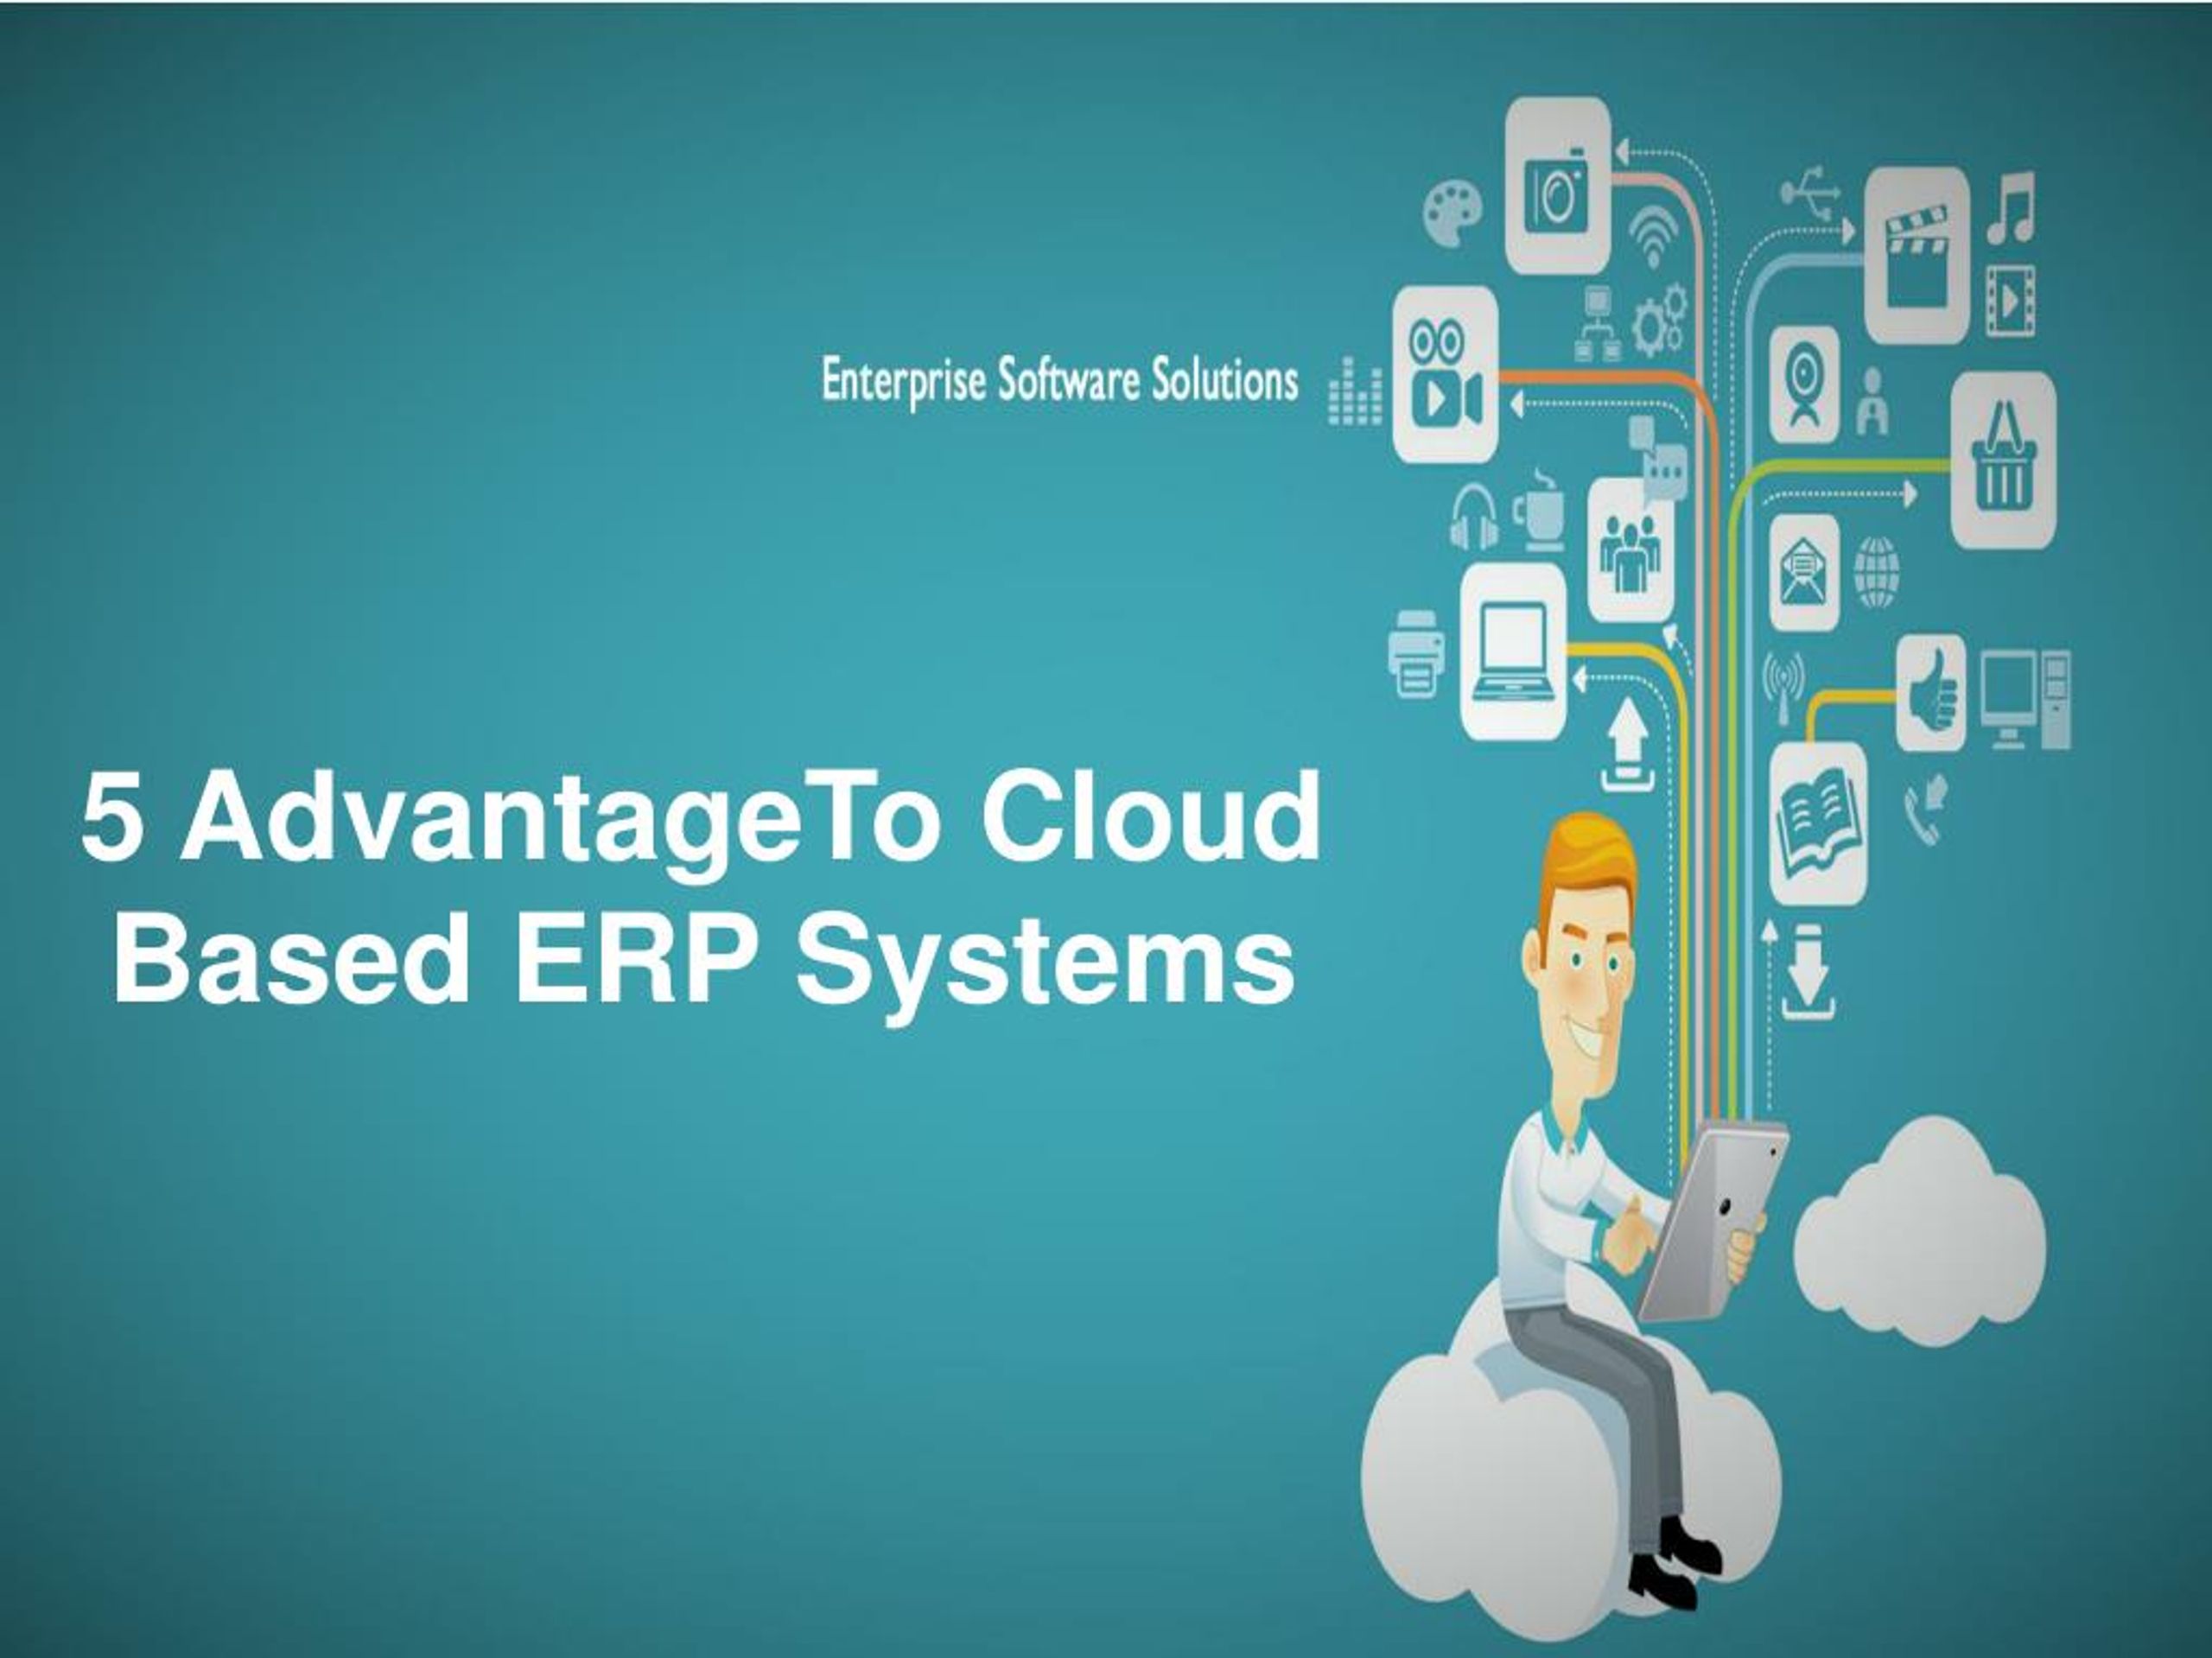 PPT - 5 Advantage To Cloud Based ERP Systems PowerPoint Presentation ...